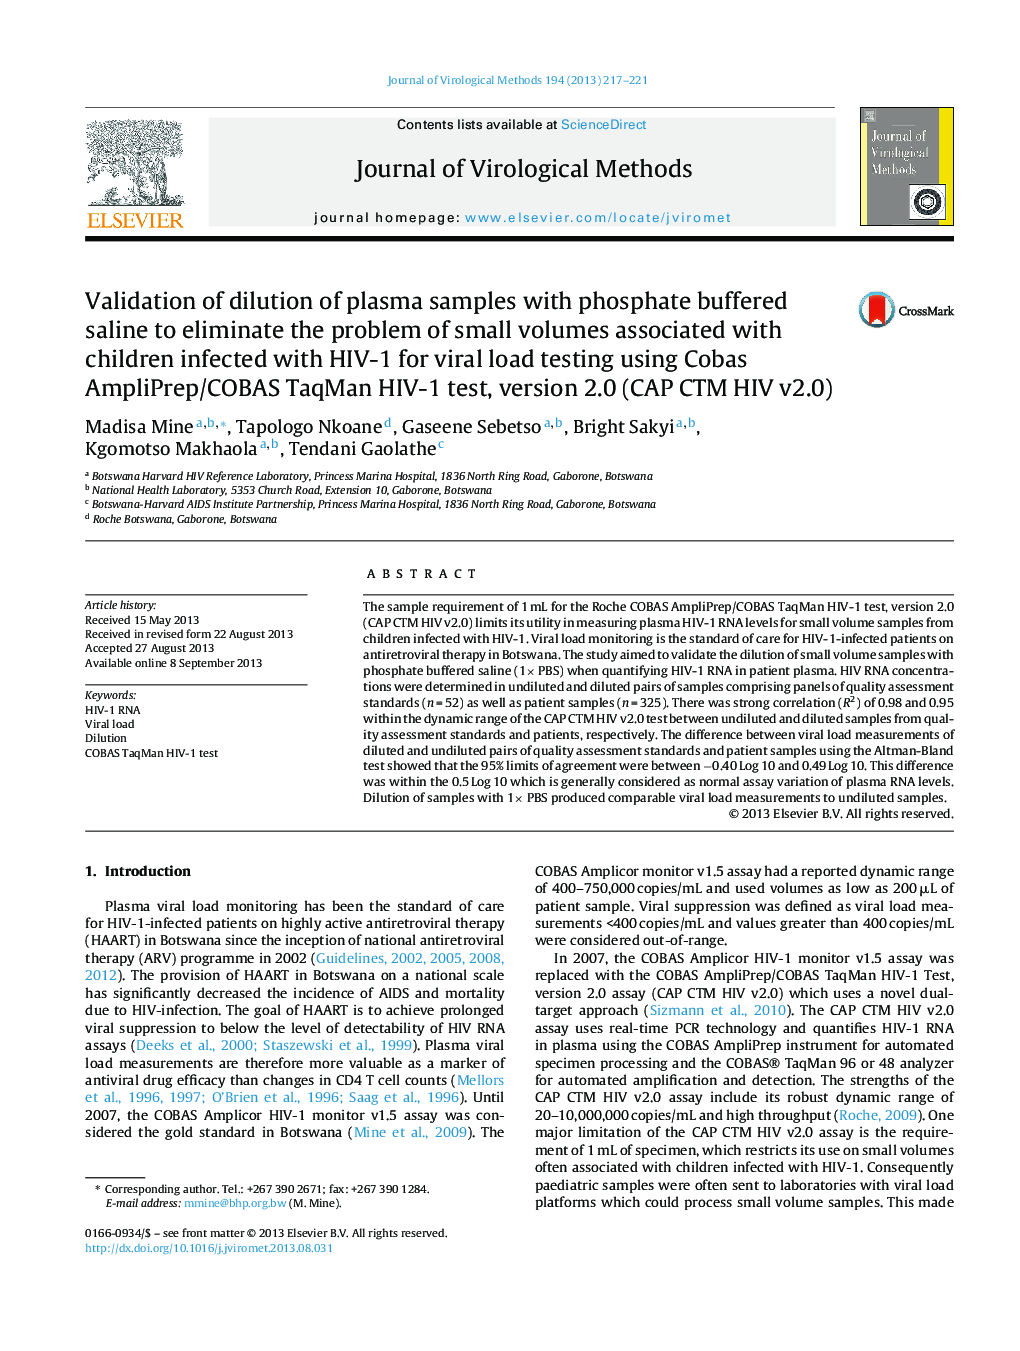 Validation of dilution of plasma samples with phosphate buffered saline to eliminate the problem of small volumes associated with children infected with HIV-1 for viral load testing using Cobas AmpliPrep/COBAS TaqMan HIV-1 test, version 2.0 (CAP CTM HIV v